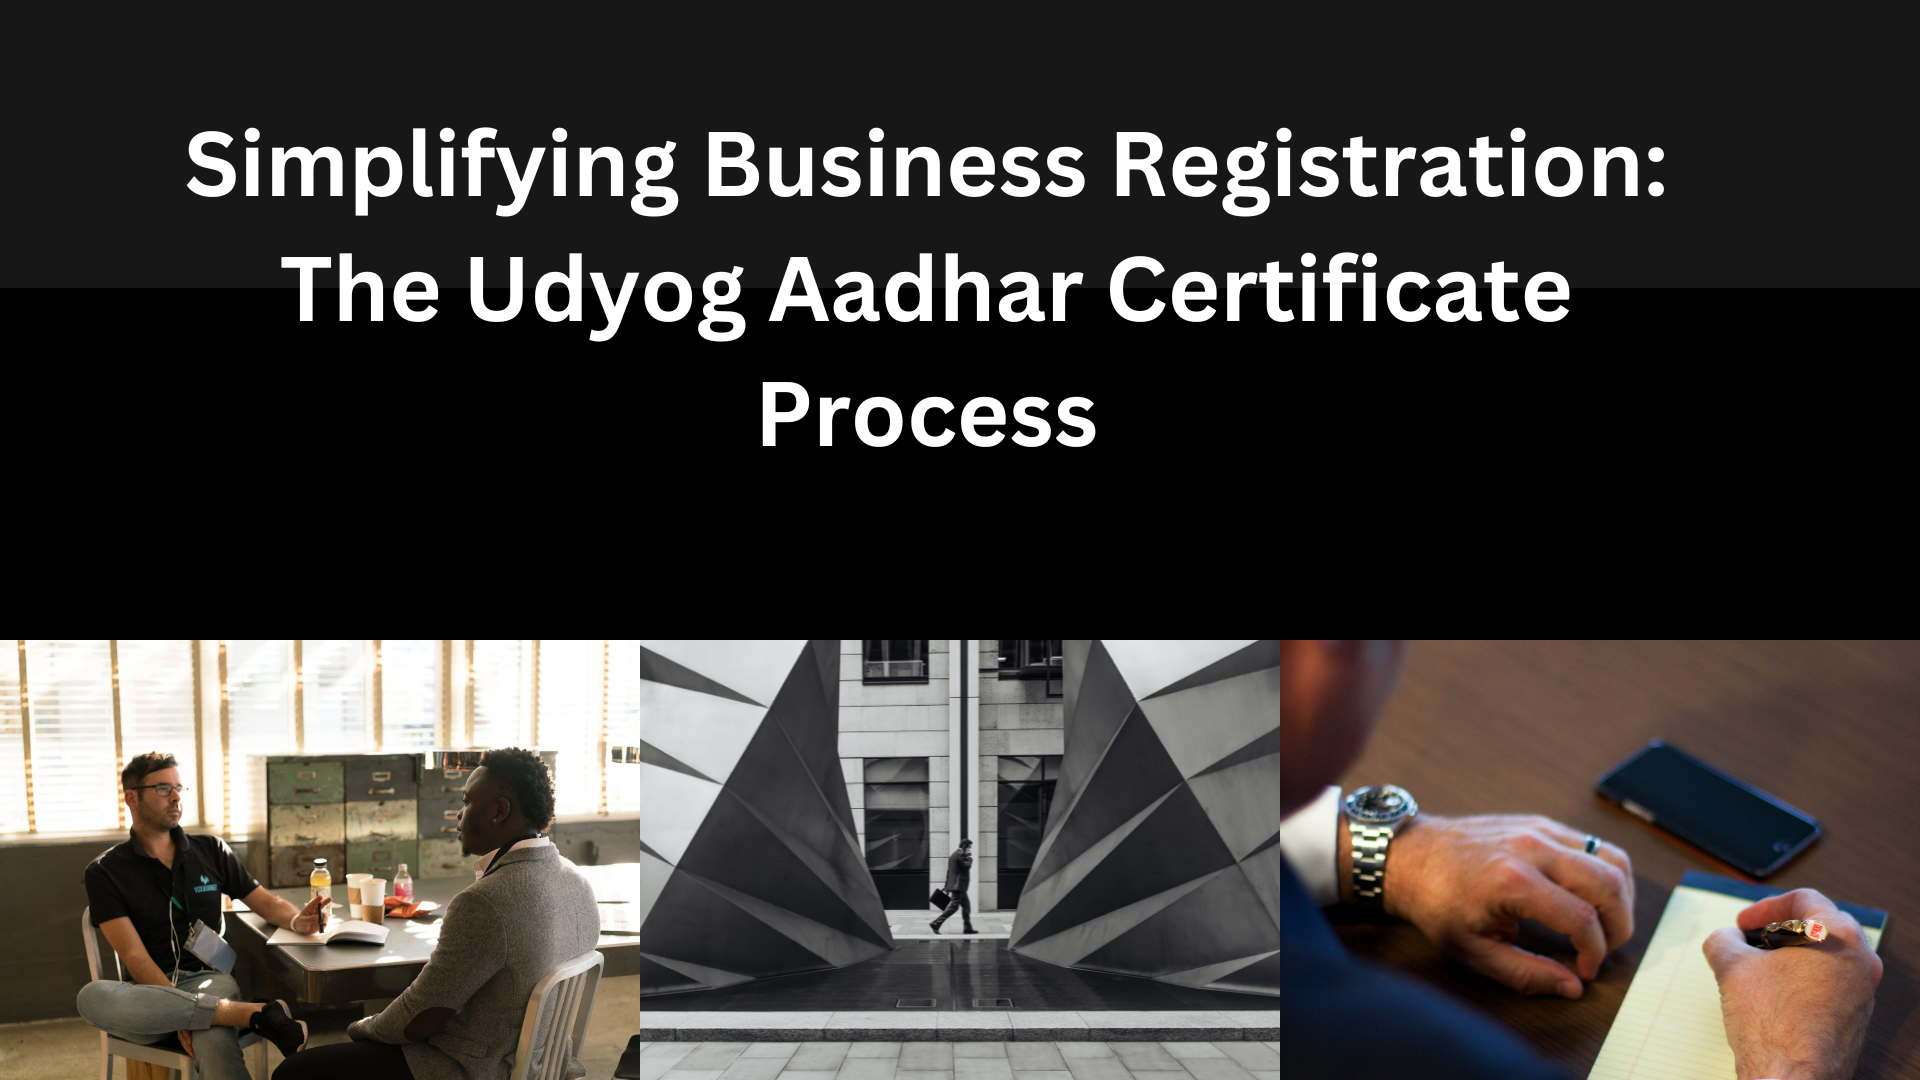 Simplifying Business Registration: The Udyog Aadhar Certificate Process